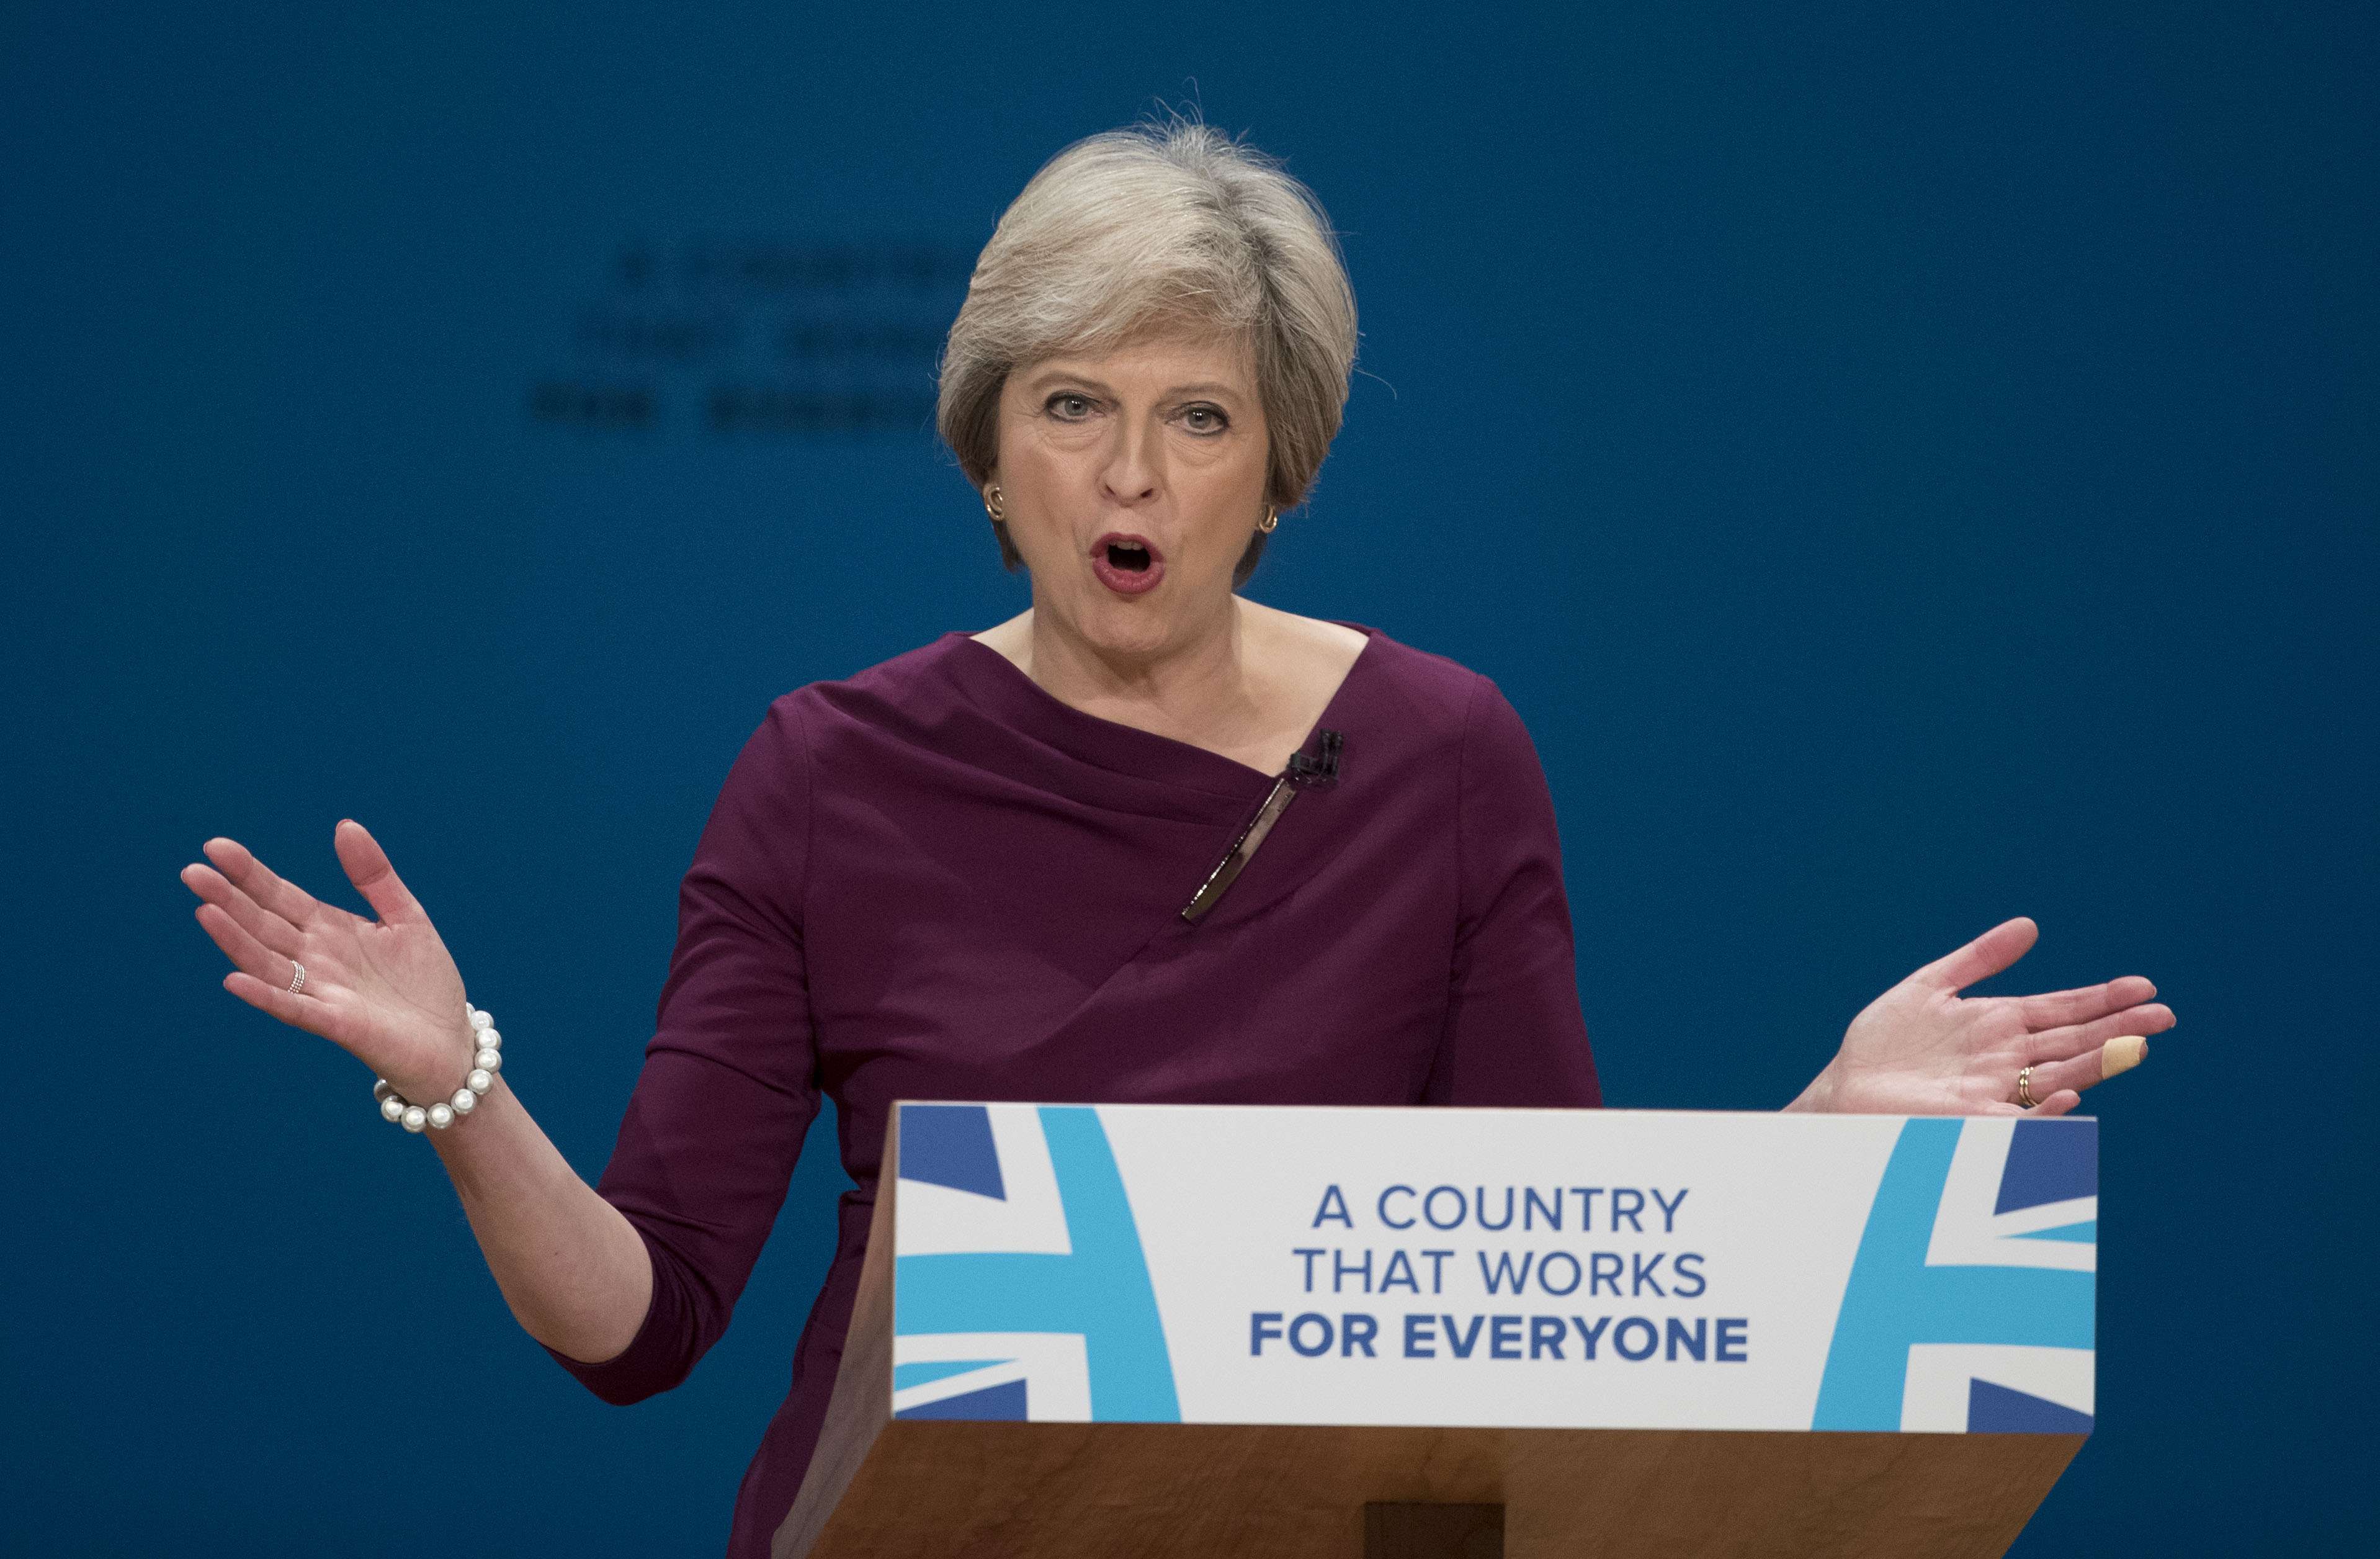 British Prime Minister Theresa May closes the Conservative Party conference in Birmingham on October 5, saying the government will occupy the “new centre ground of British politics”. Photo: Xinhua